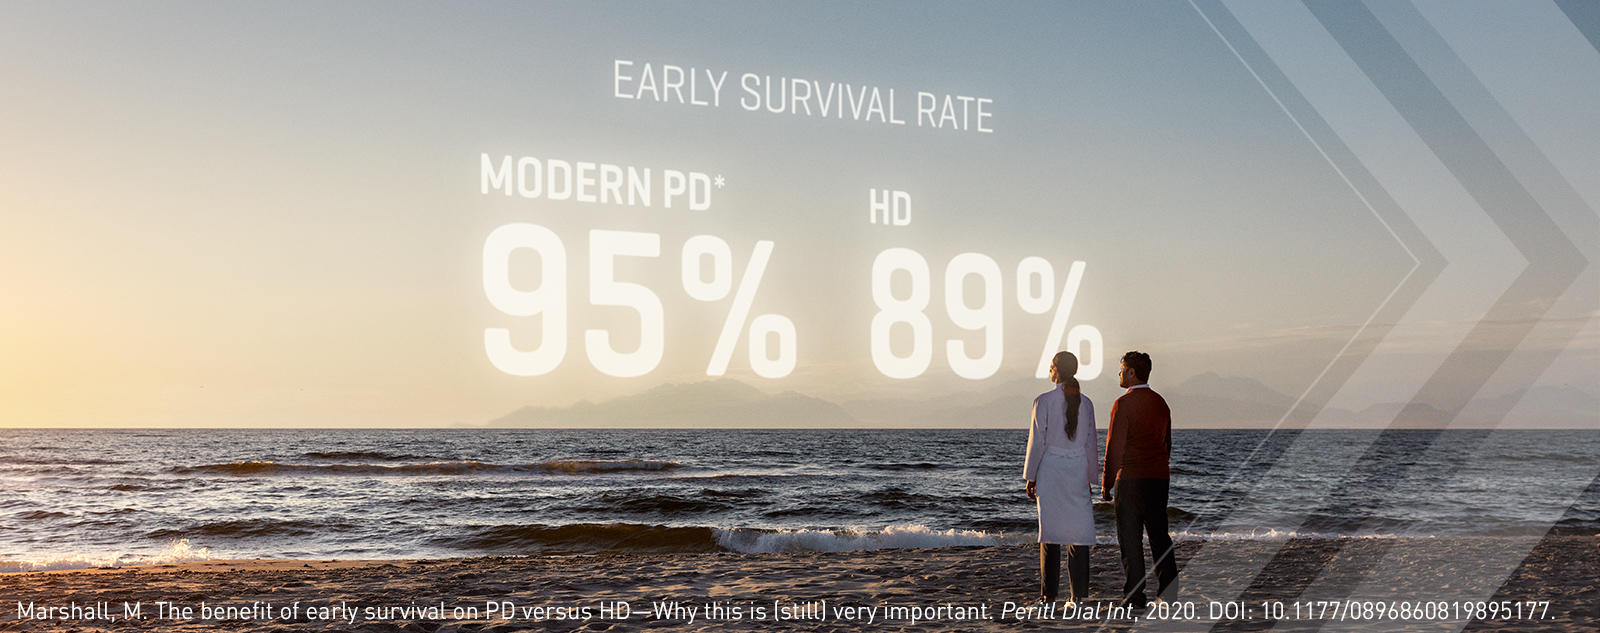 ModernPD_footer_image_early_survival_1600x633.jpg